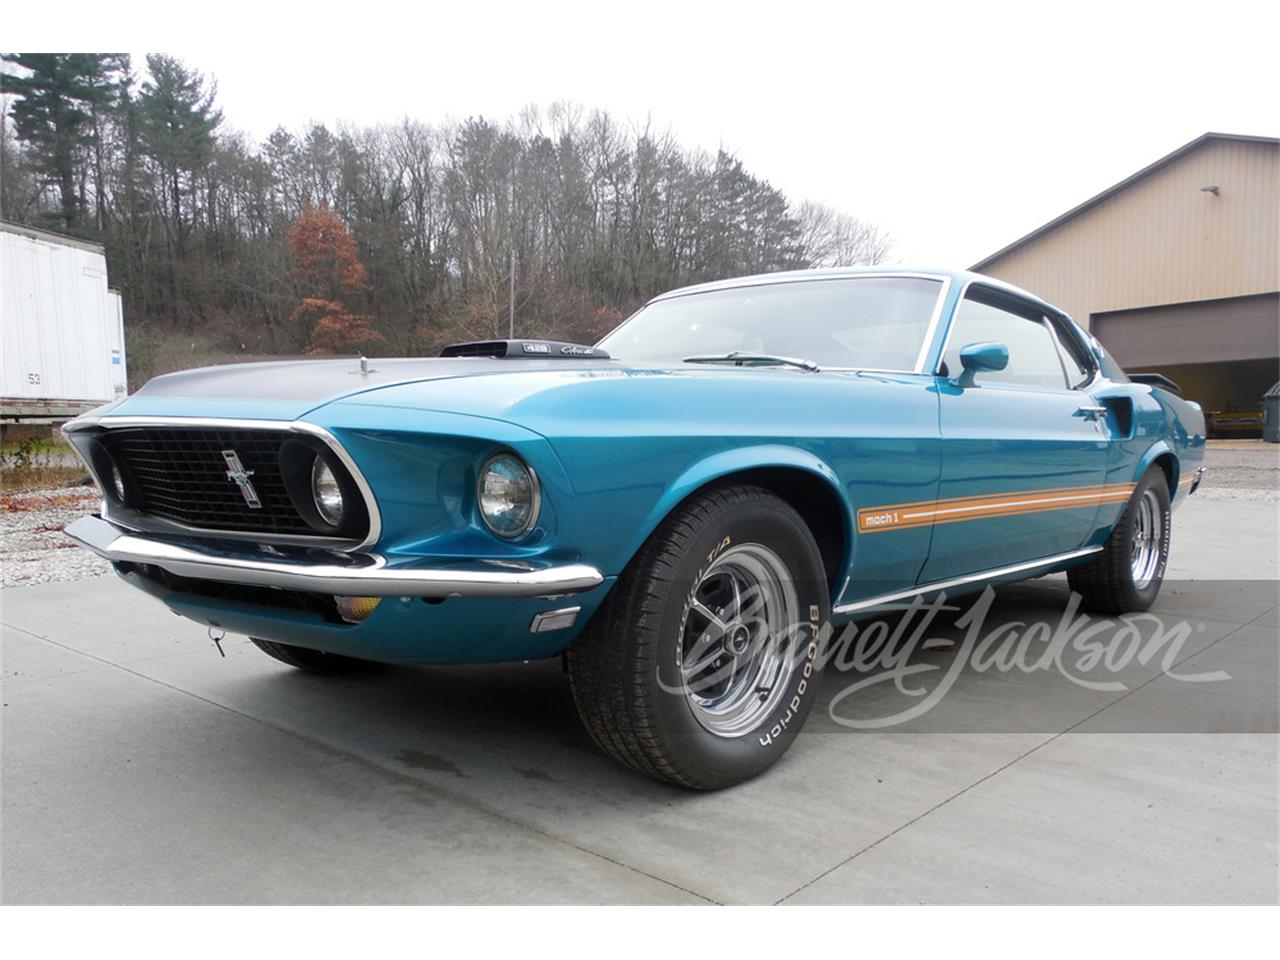 For Sale at Auction: 1969 Ford Mustang Mach 1 in Scottsdale, Arizona for sale in Scottsdale, AZ